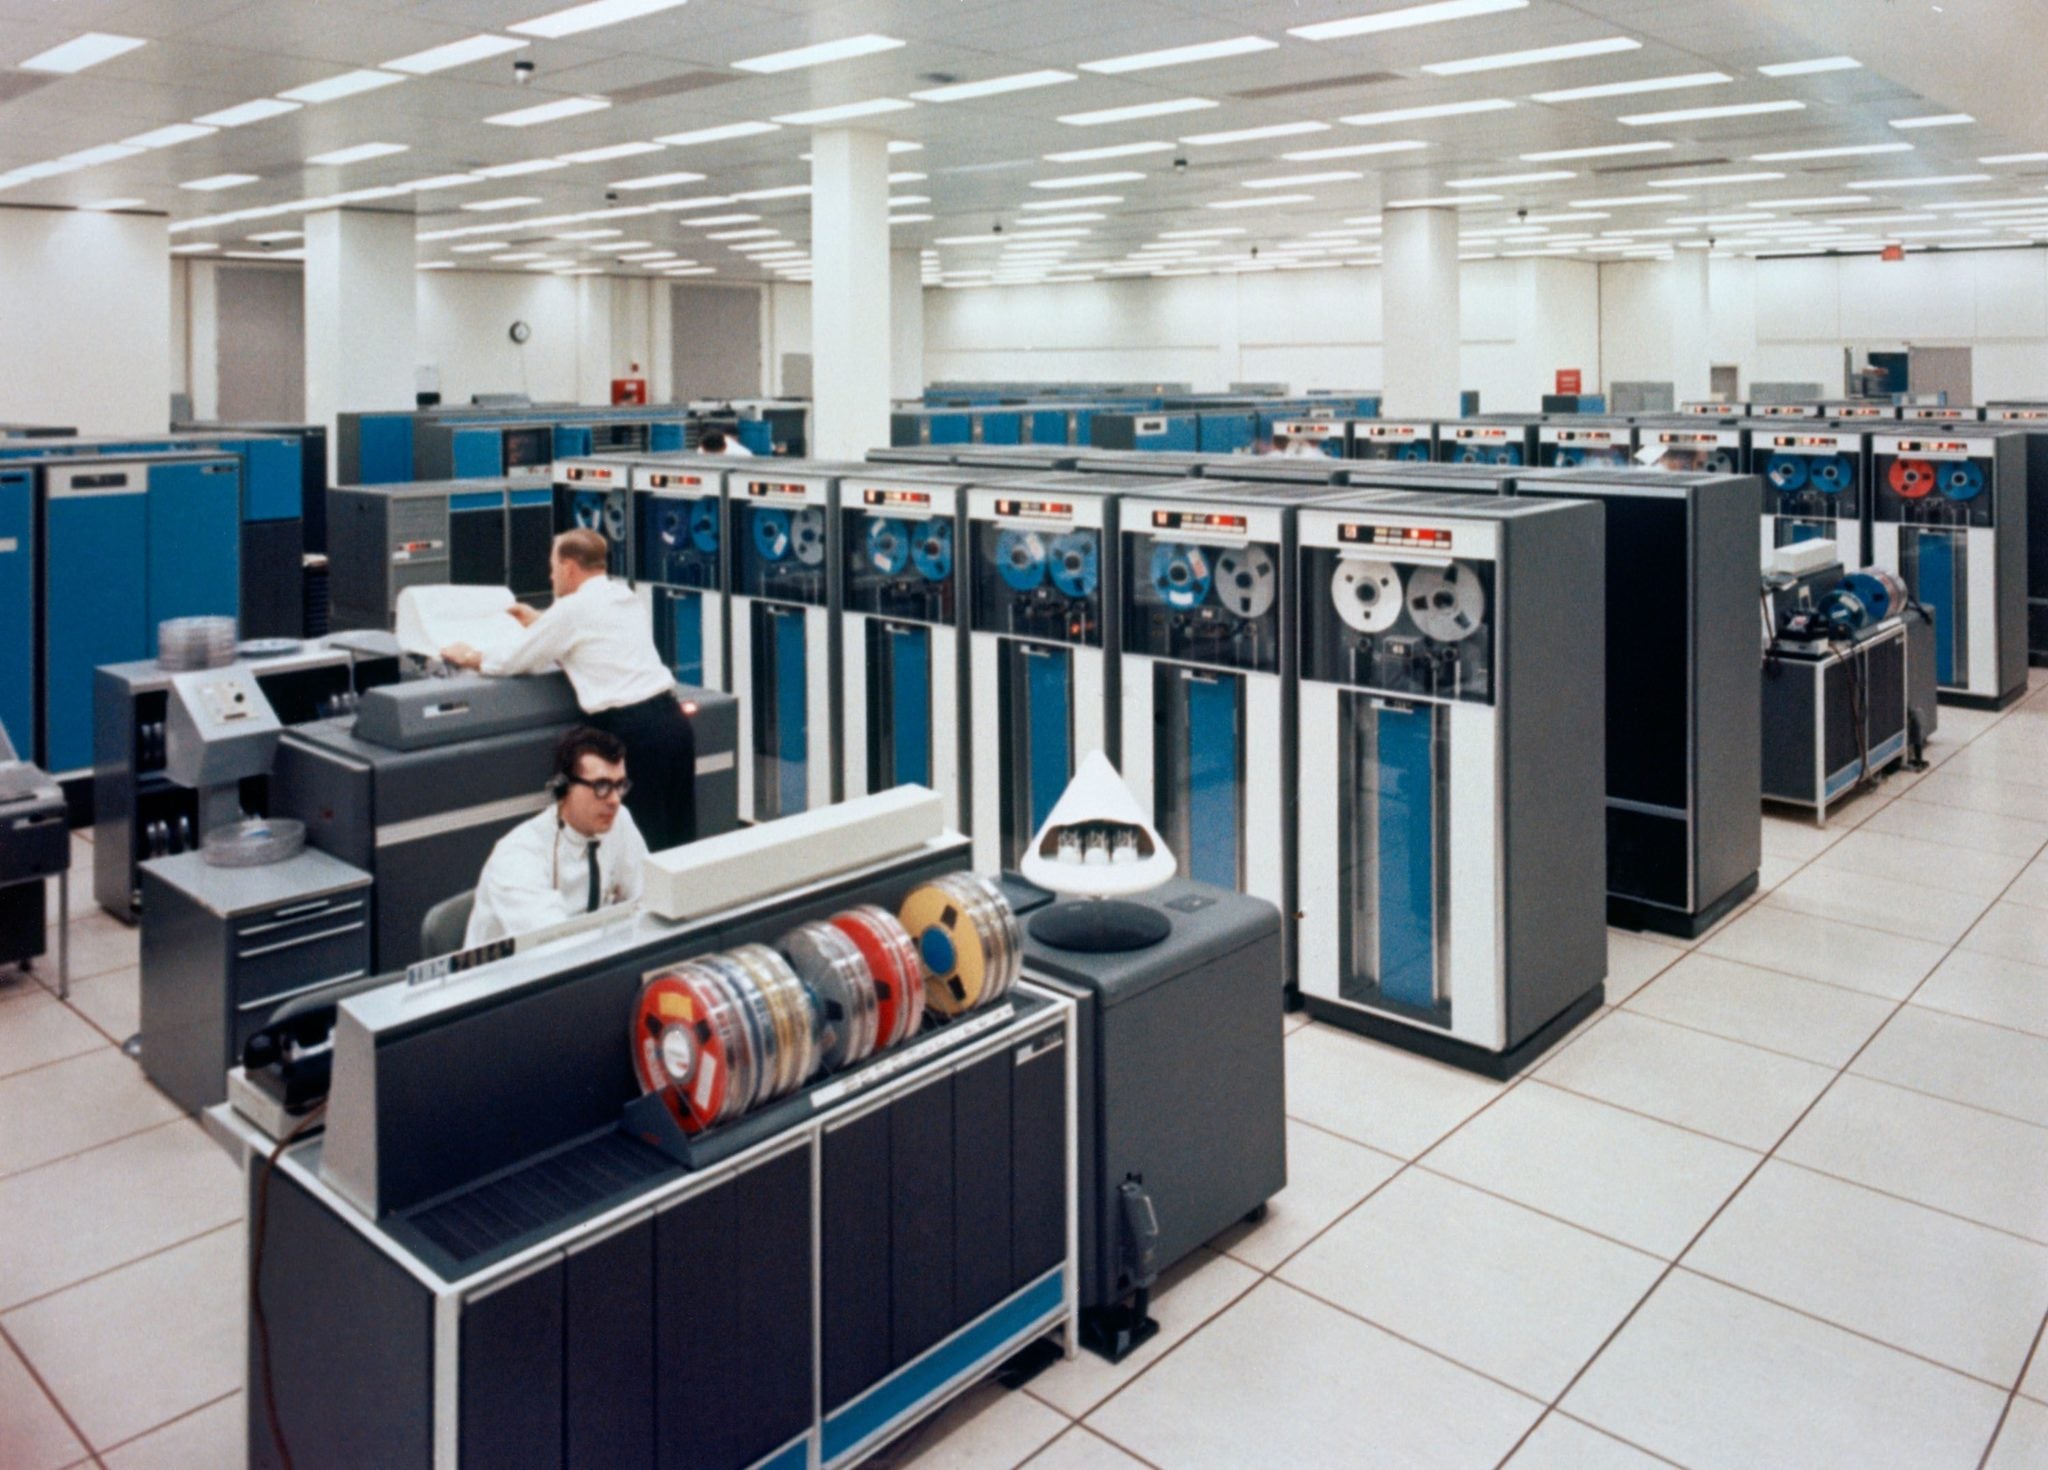 "How the Heck did We Get Here?" Governor in Plea for COBOL Programmers